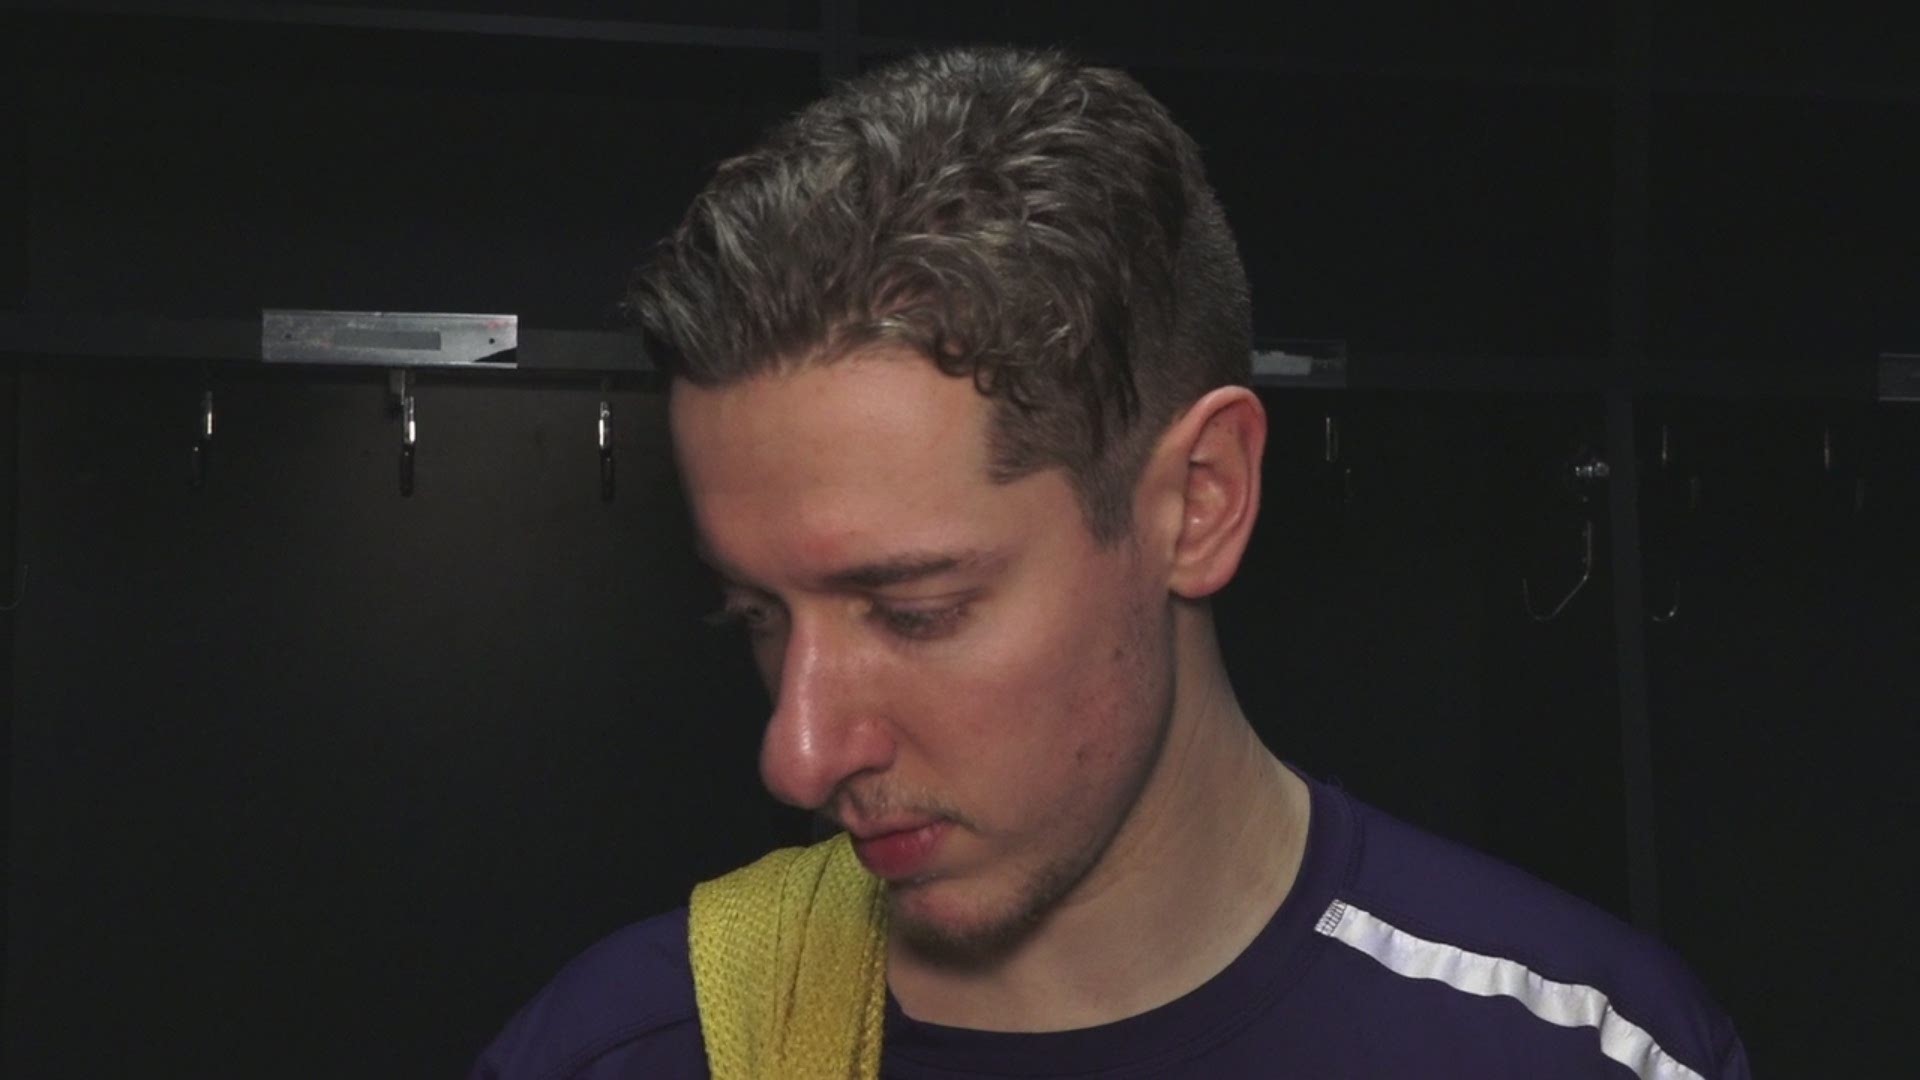 Goalie Jordan Binnington talks to the media after the Blues beat the Kings 4-1 in LA. It was the Blues' sixth-straight win. Courtesy: Blue Note Productions